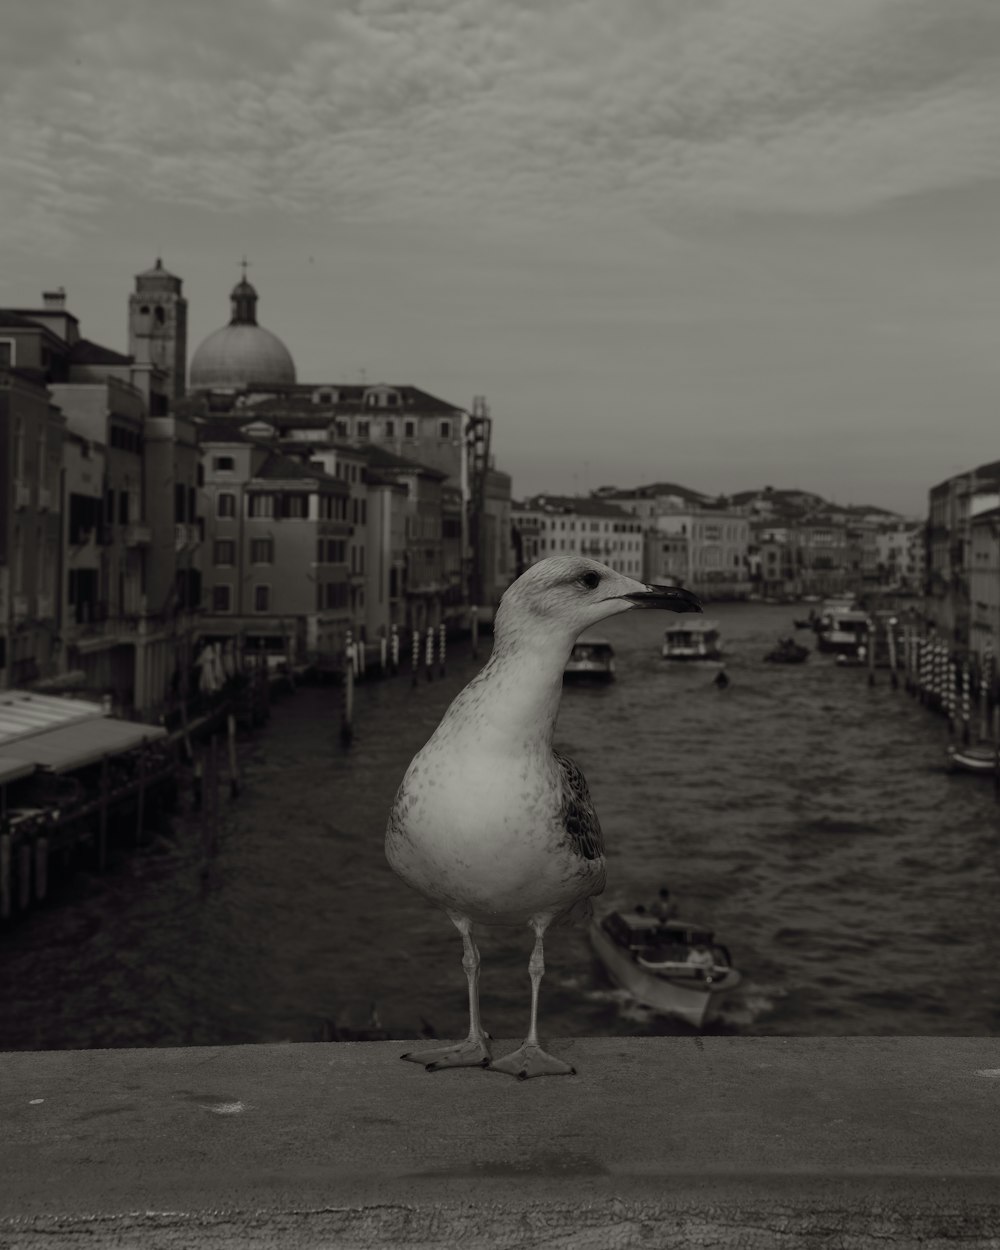 a seagull standing on a ledge overlooking a waterway